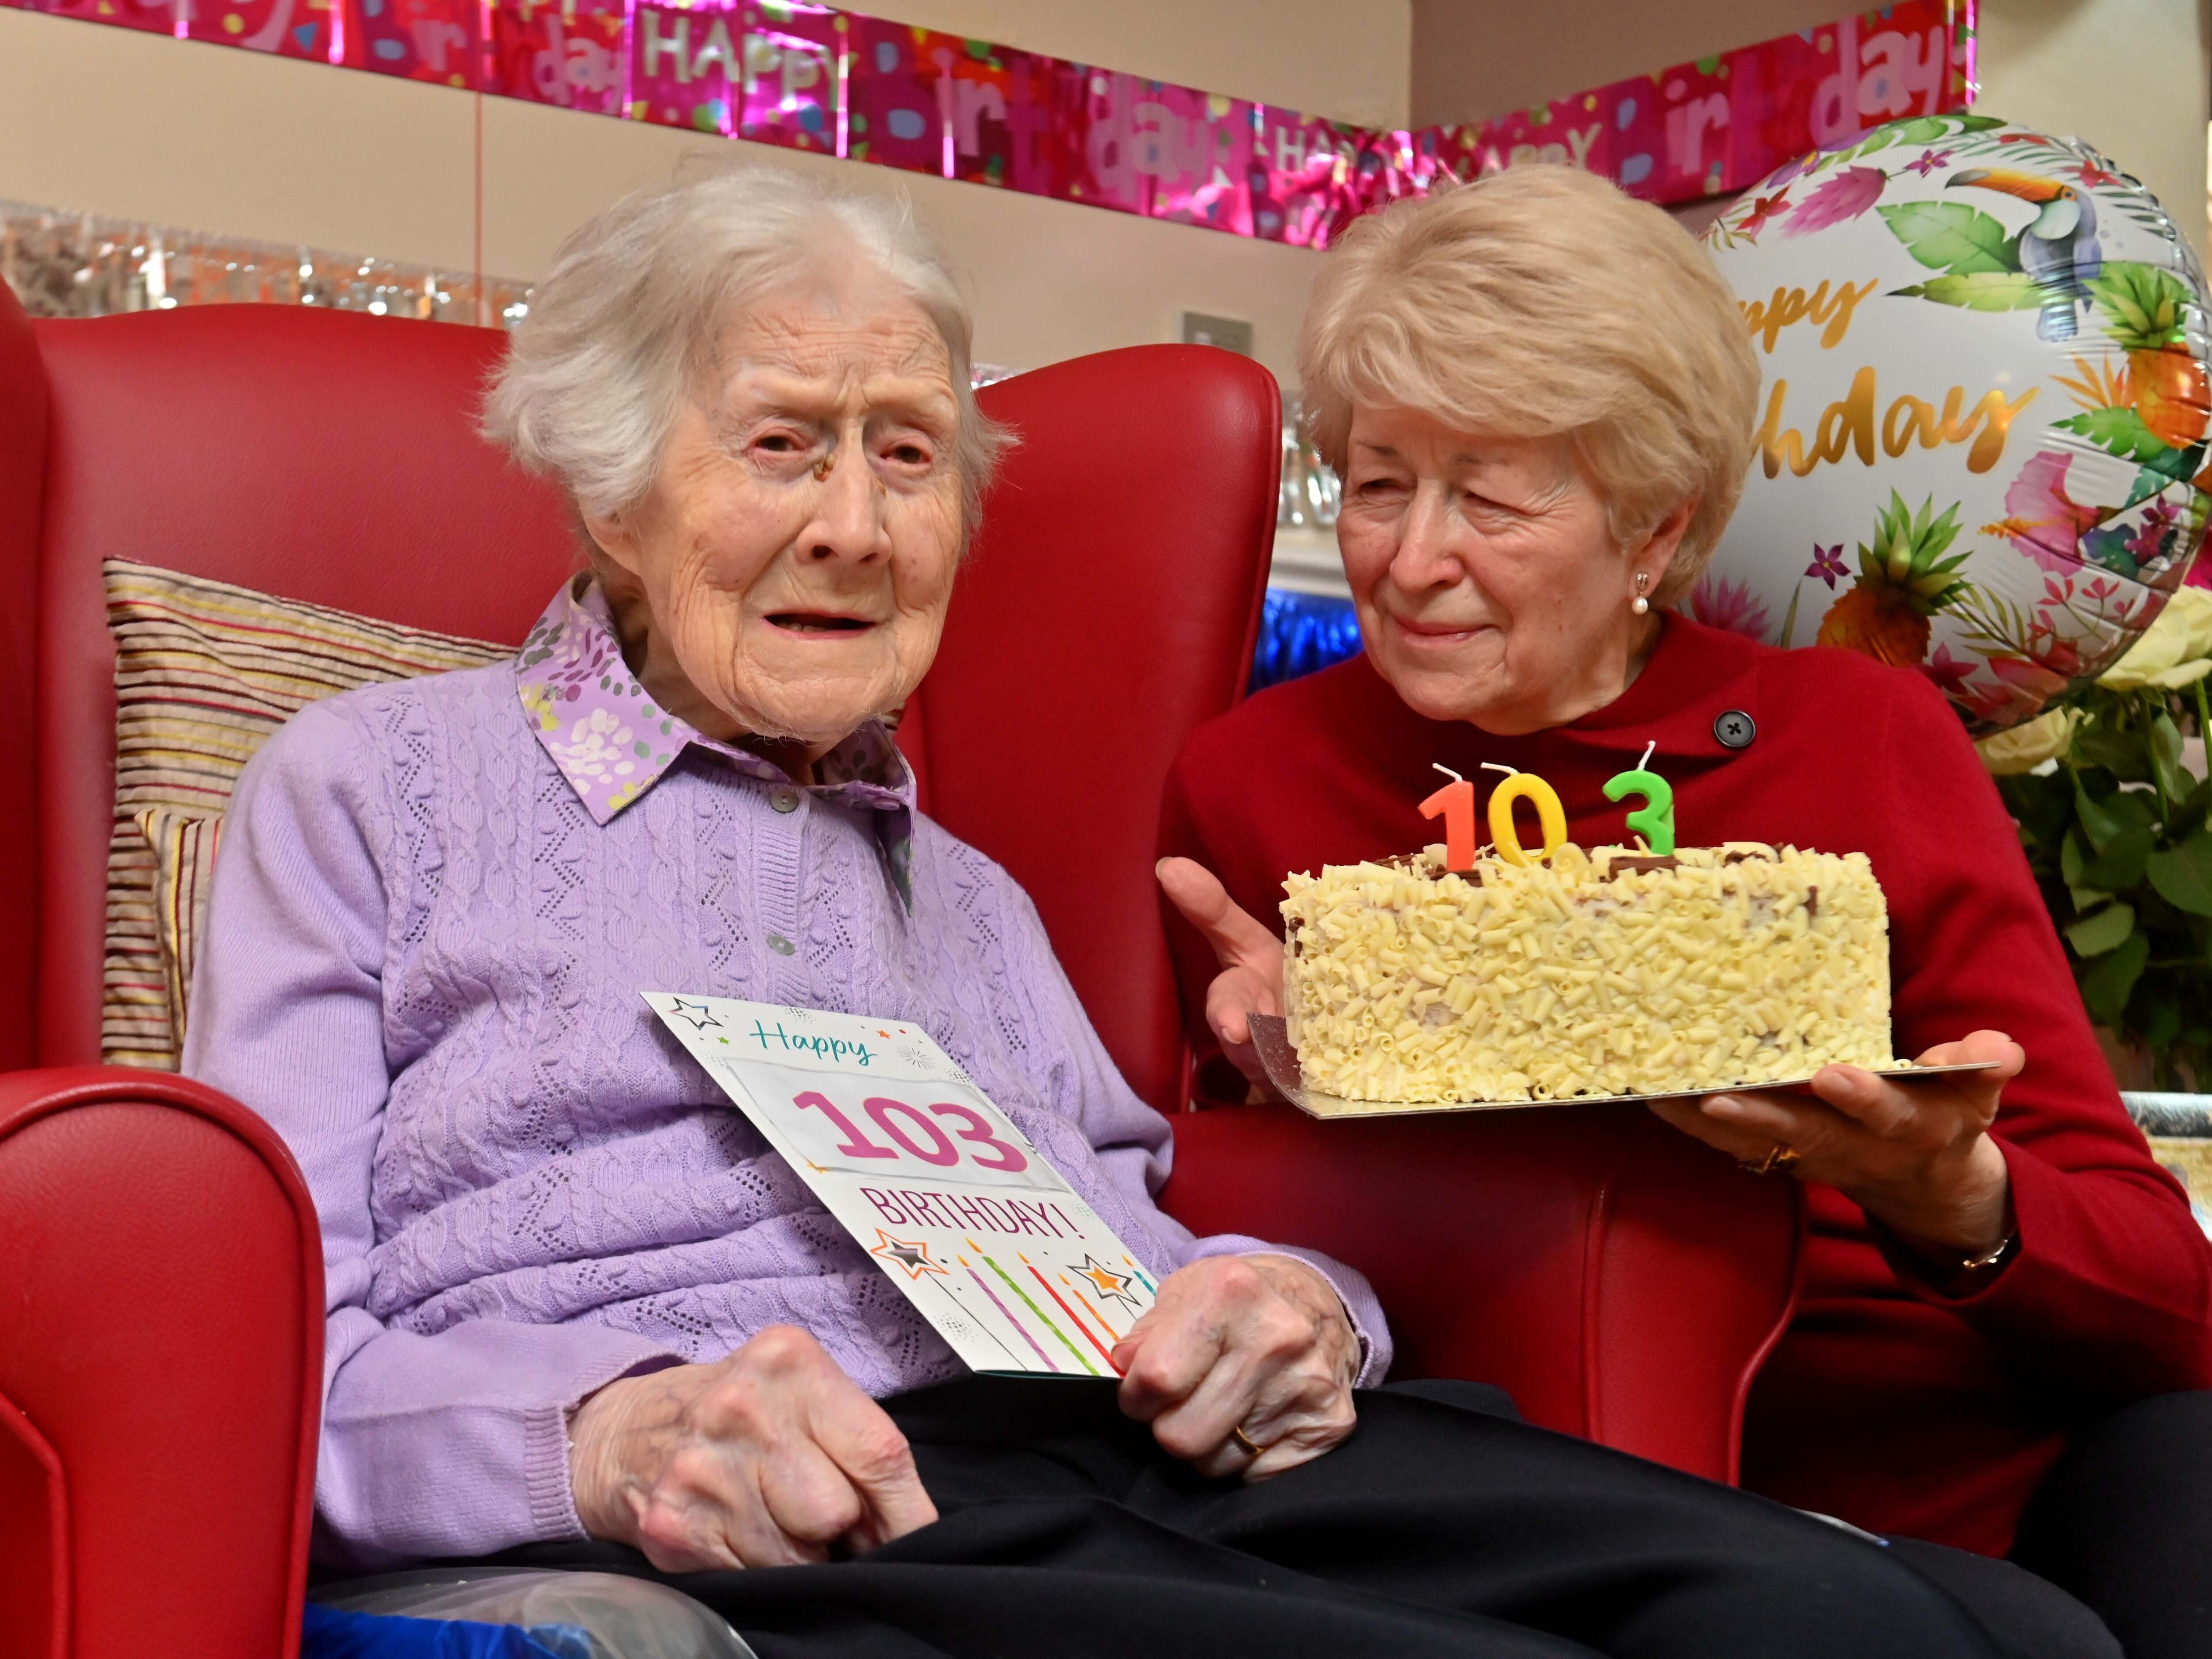 Great-great grandmother who 'won't let anything beat her' celebrates 103rd birthday